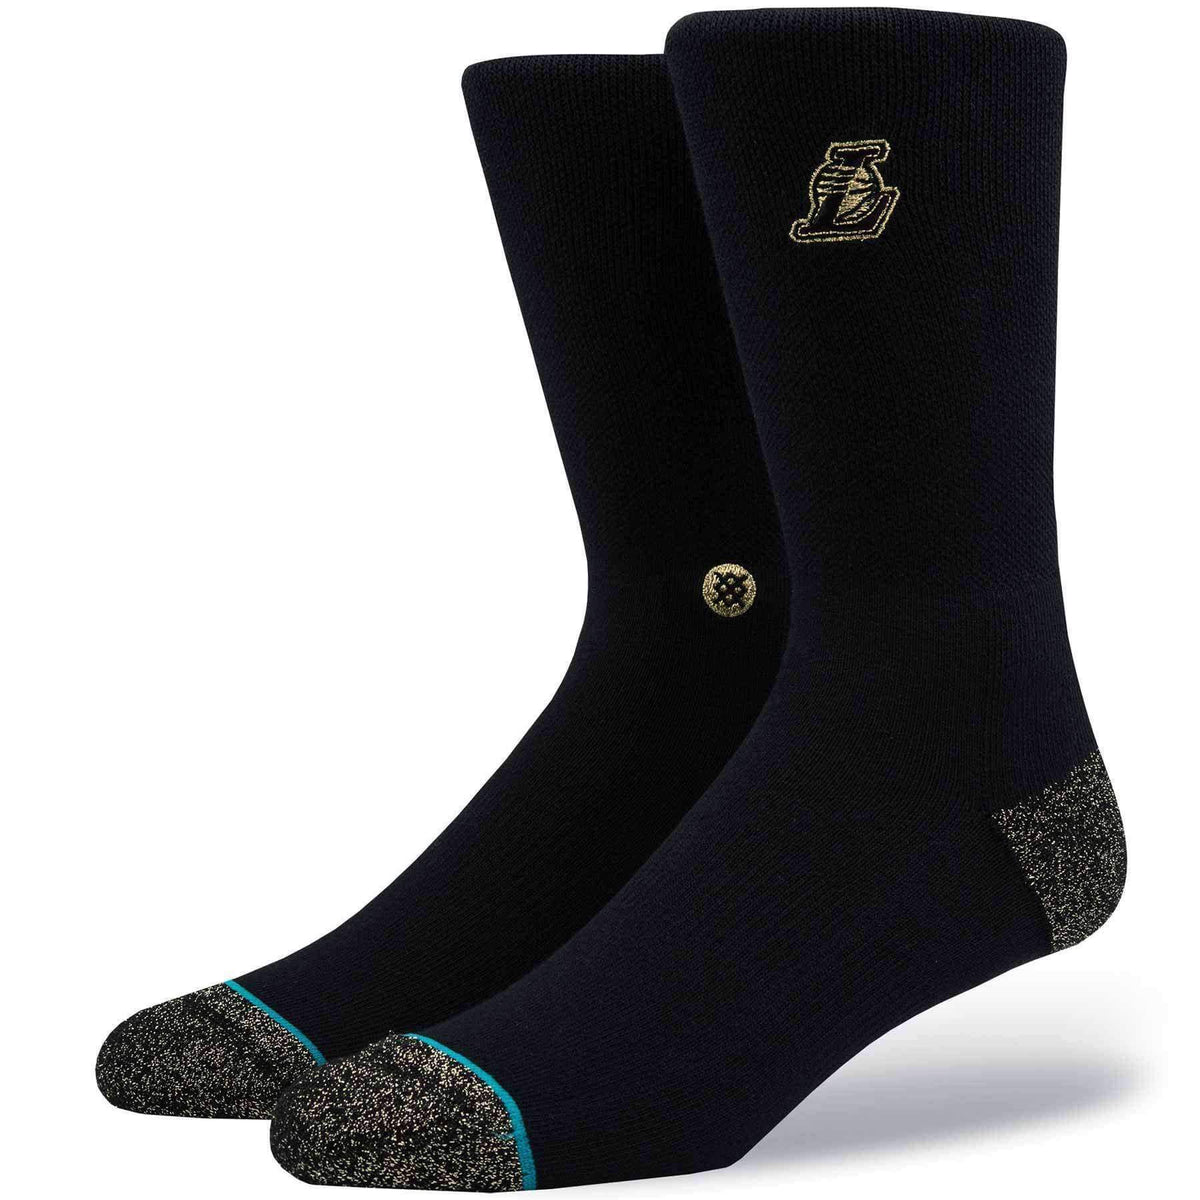 Stance NBA Arena Lakers Trophy Socks in Black/Gold Mens Crew Length Socks by Stance